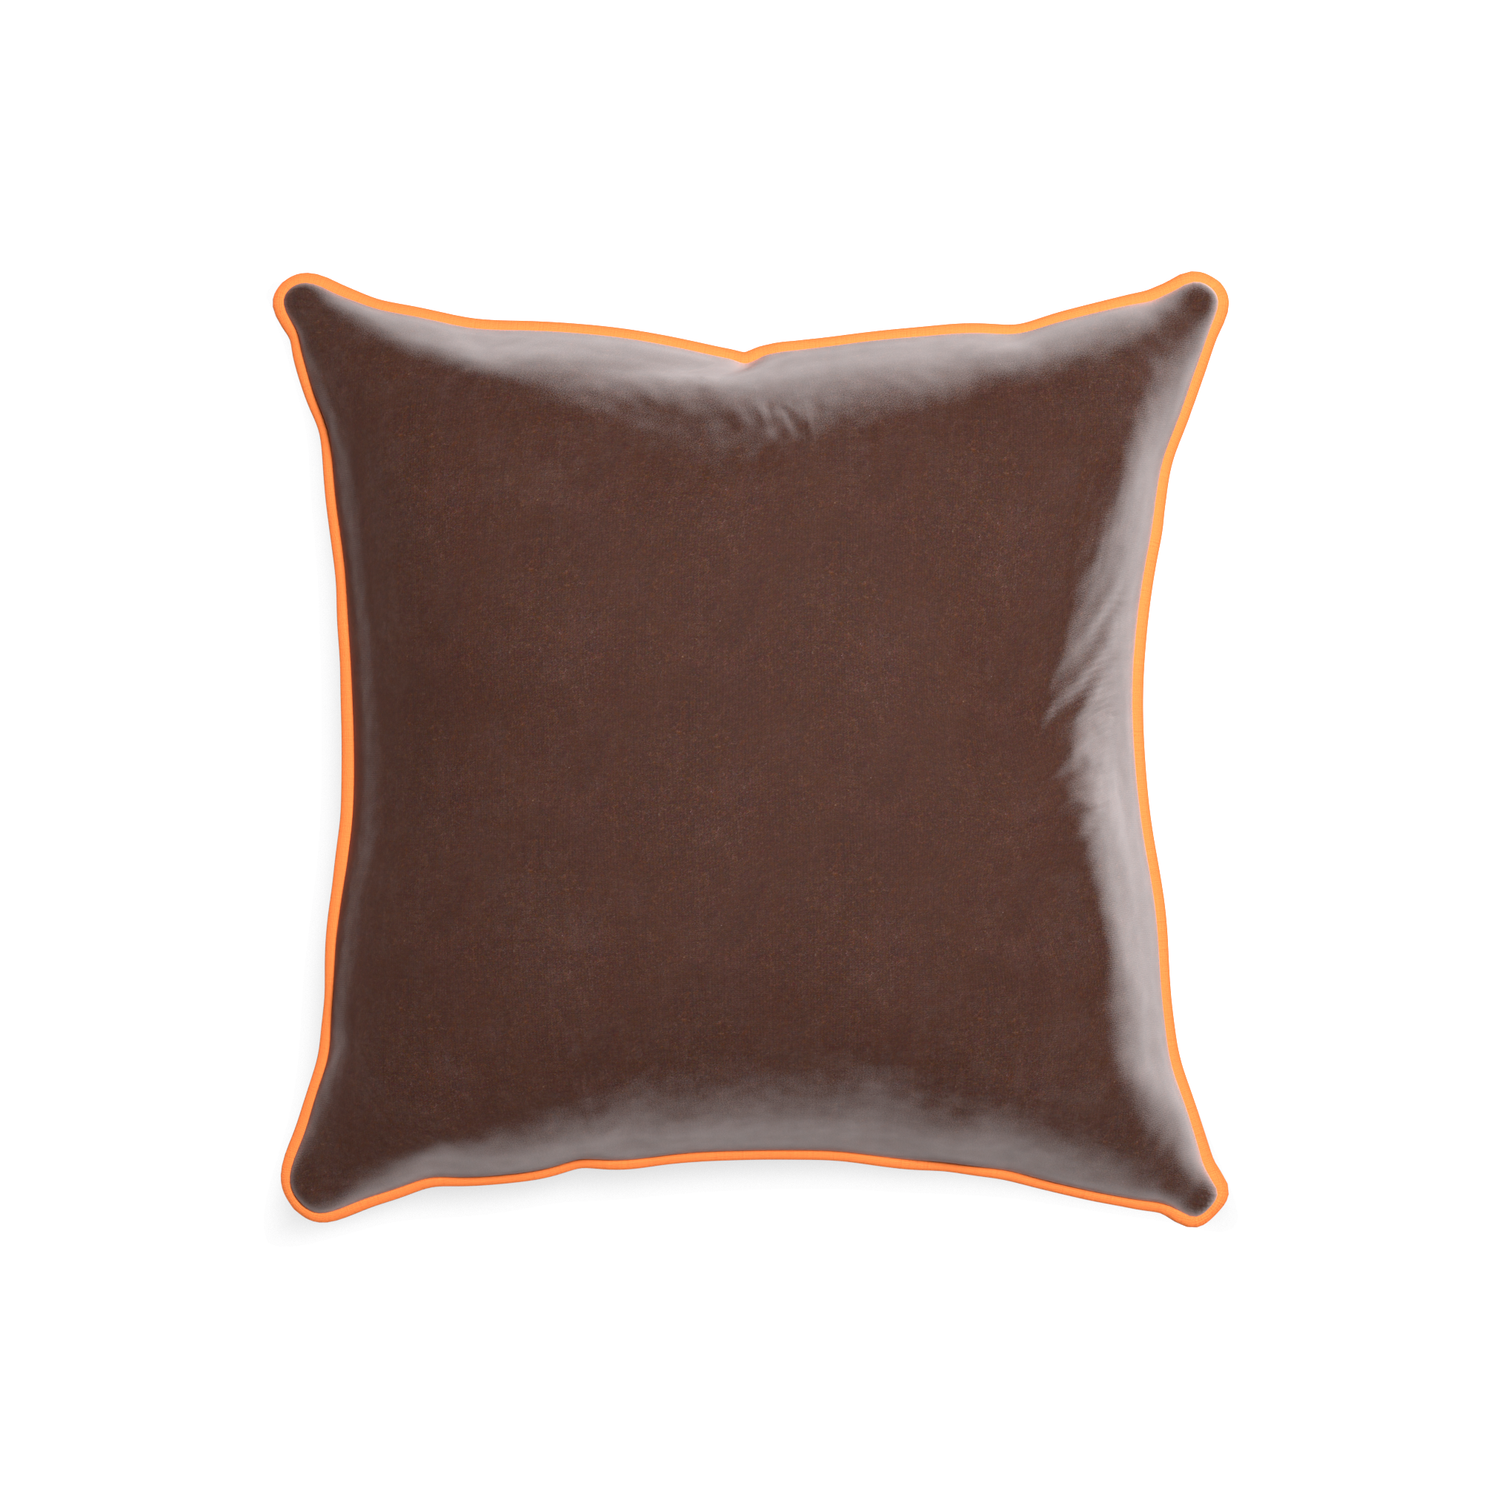 20-square walnut velvet custom pillow with clementine piping on white background